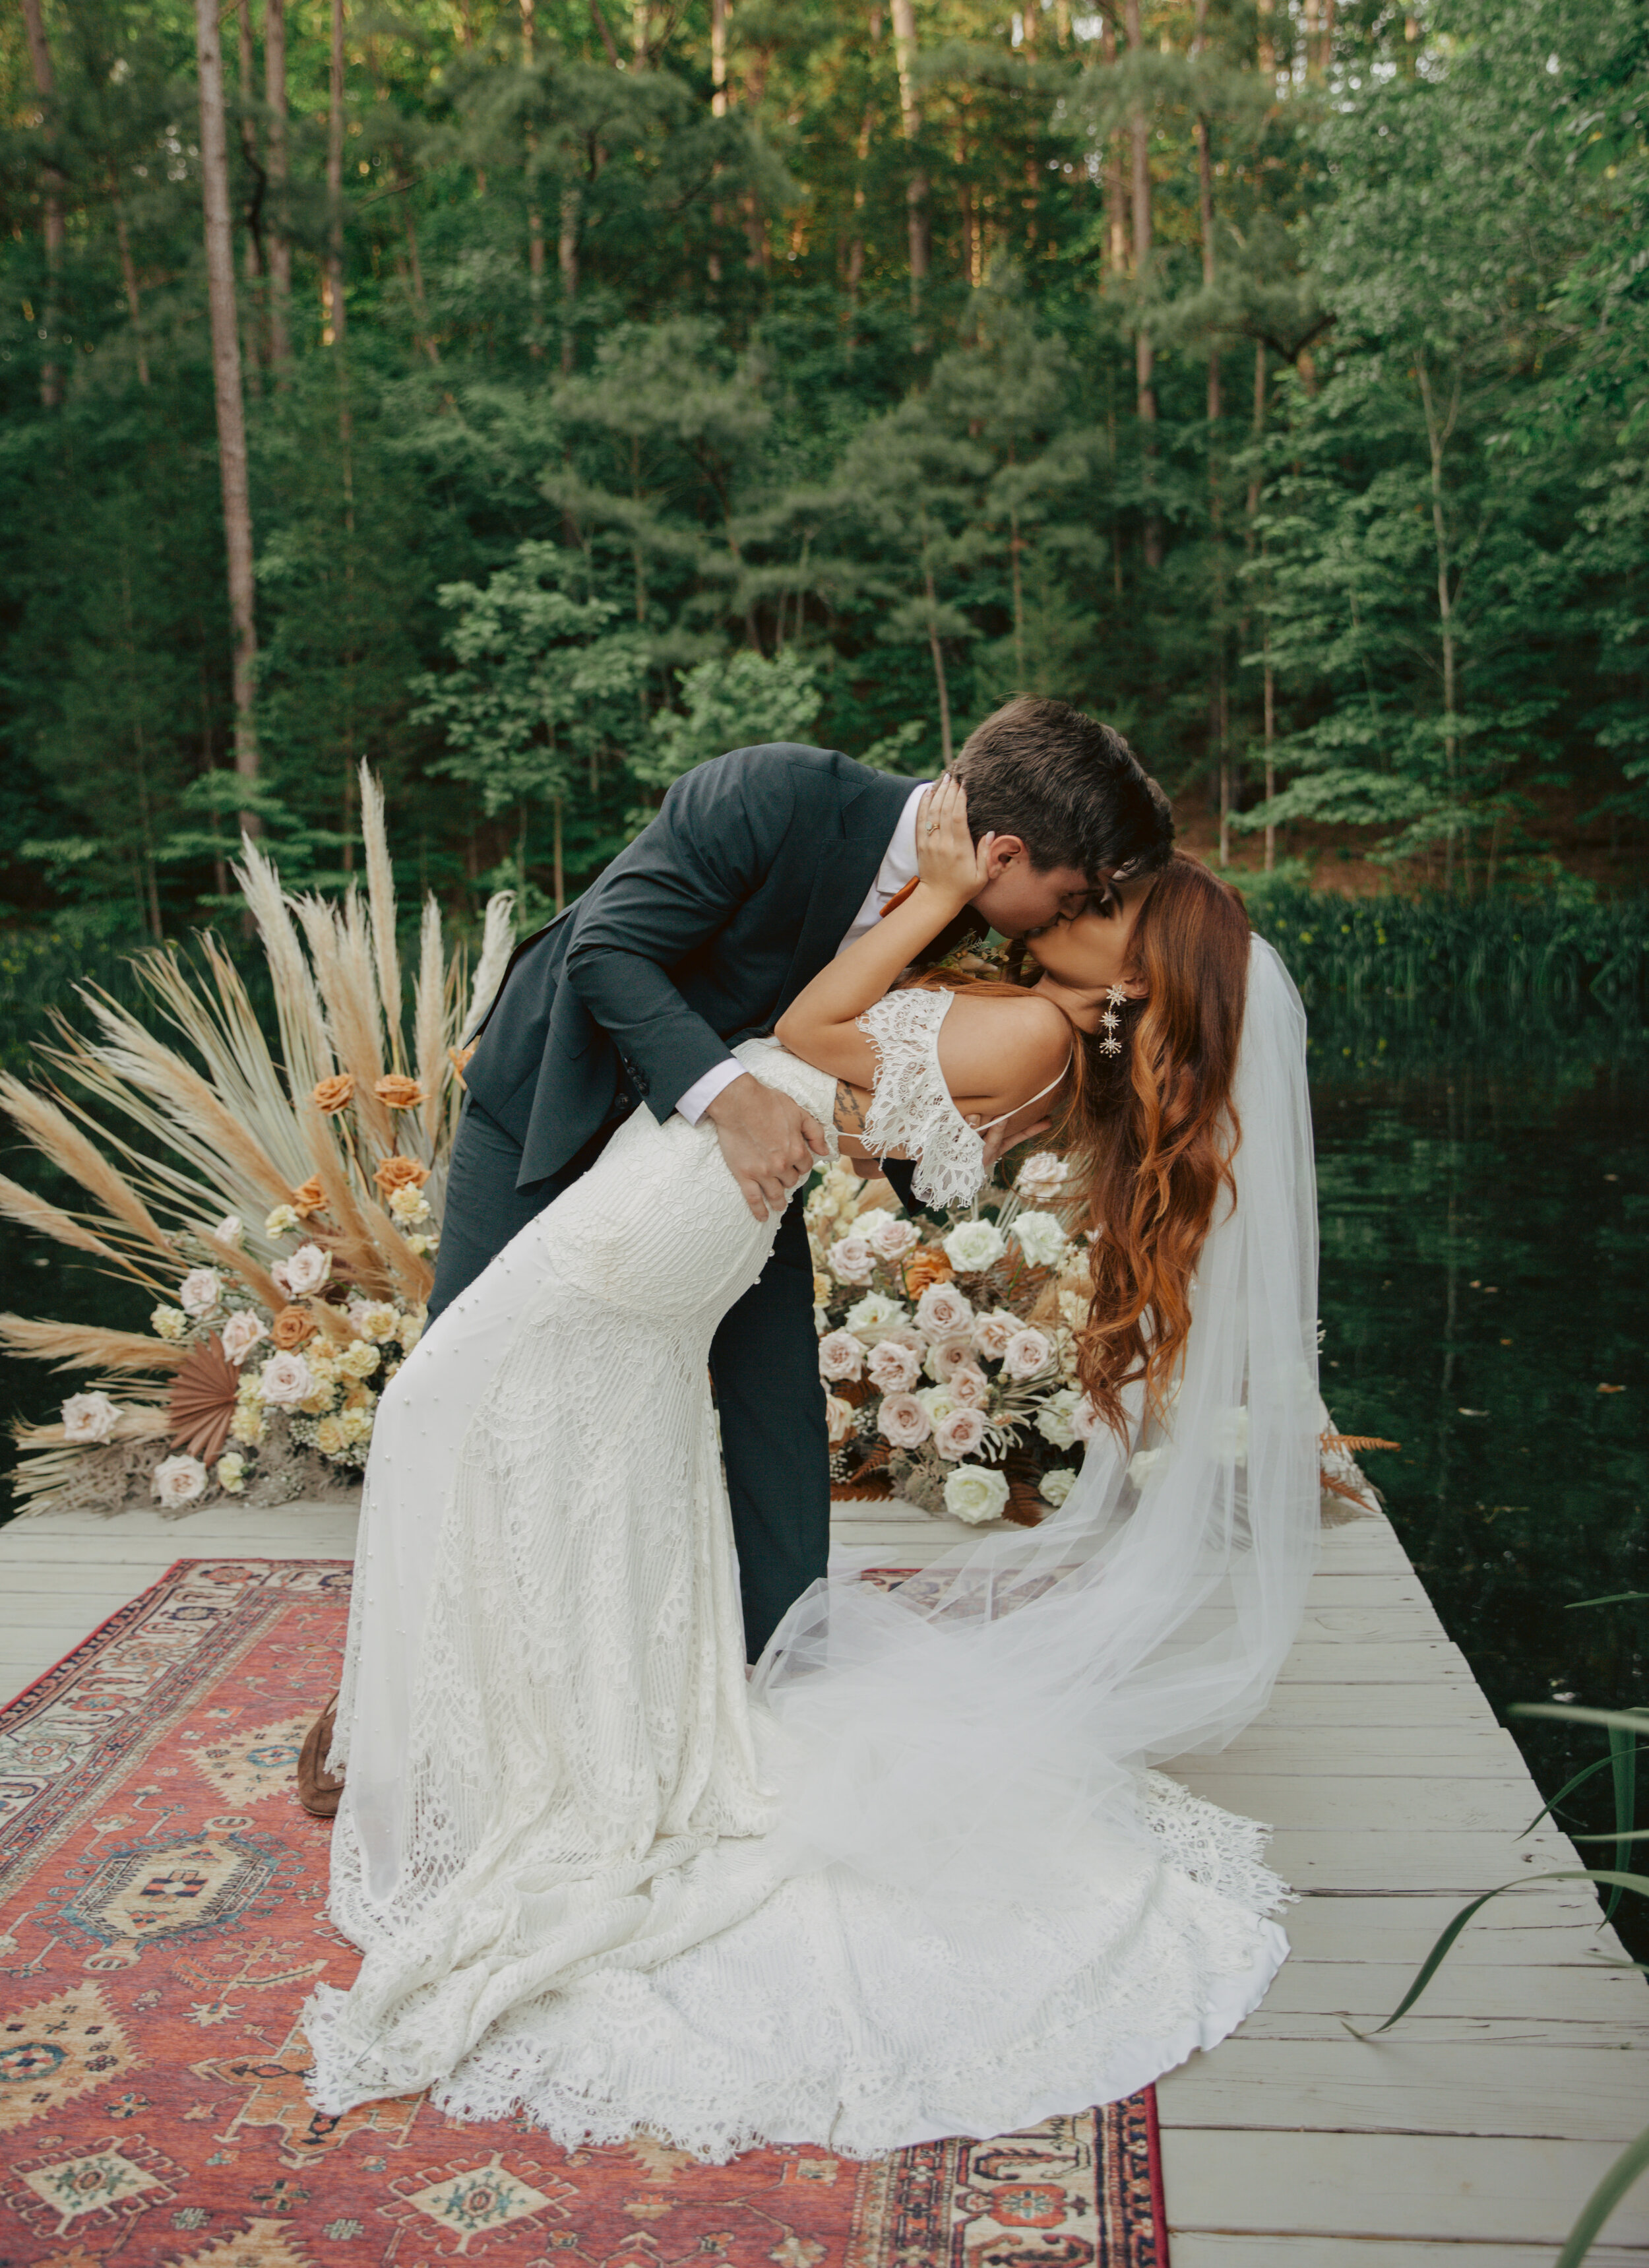 Bohemian, modern floral installation with gold and blush roses, pampas grass, dried ferns, and dried palms, growing on a private dock with a Turkish rug. Nashville wedding florist.